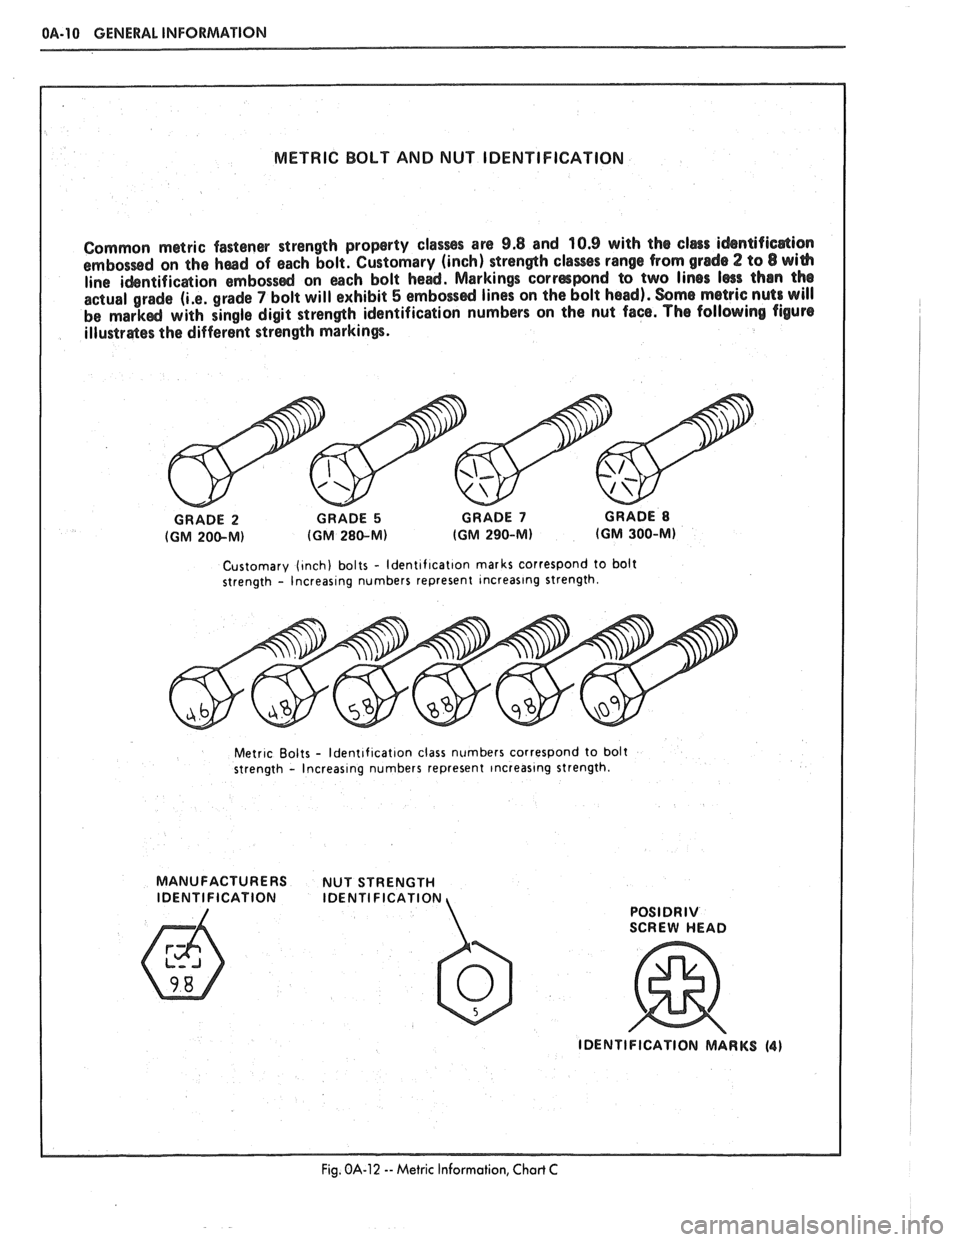 PONTIAC FIERO 1988  Service User Guide 
OA-10 GENERAL INFORMATION 
METRIC  BOLT AND NUT IDENTIFICATION 
Common  metric fastener  strength  property 
classss are 9.8 and 10.9 with the clers idsntifica$ion 
embossed  on the haad of each  bol